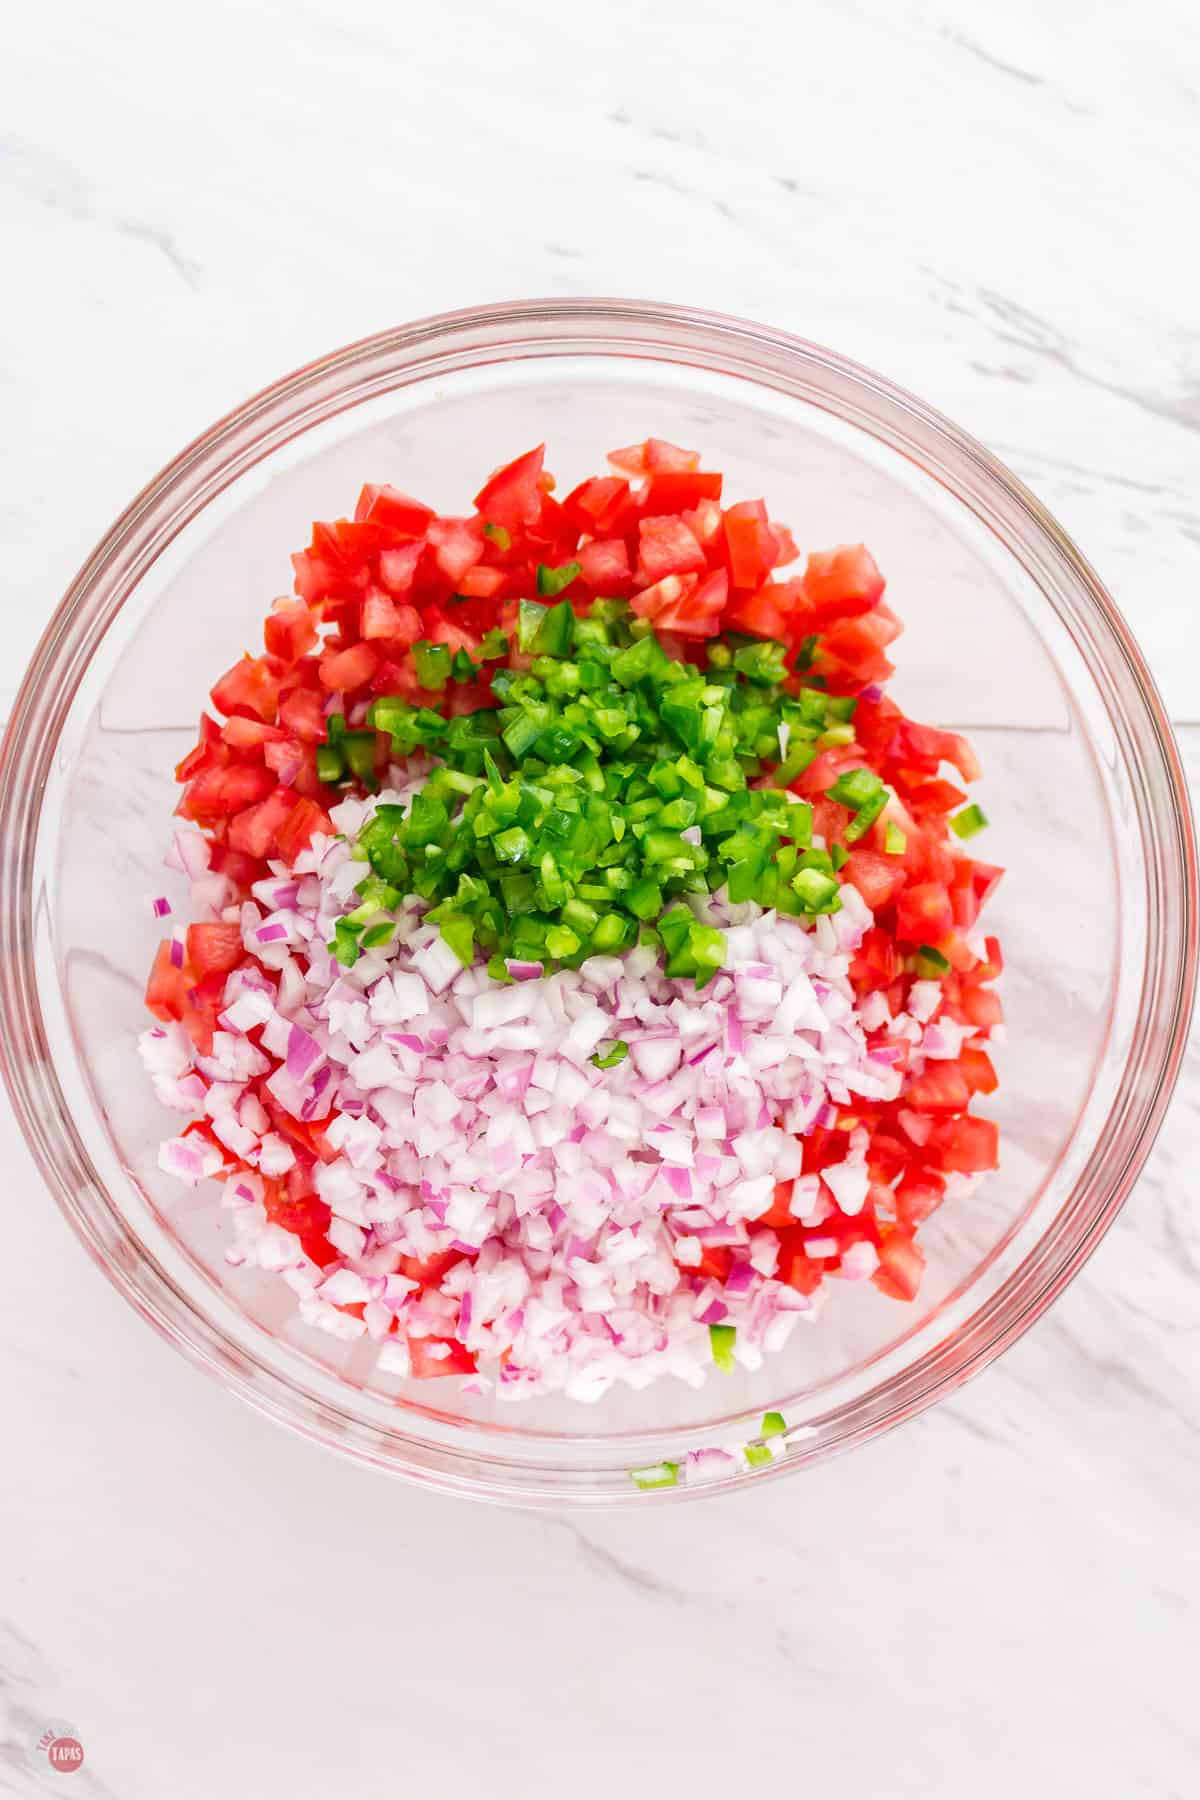 diced tomatoes and onion in a bowl